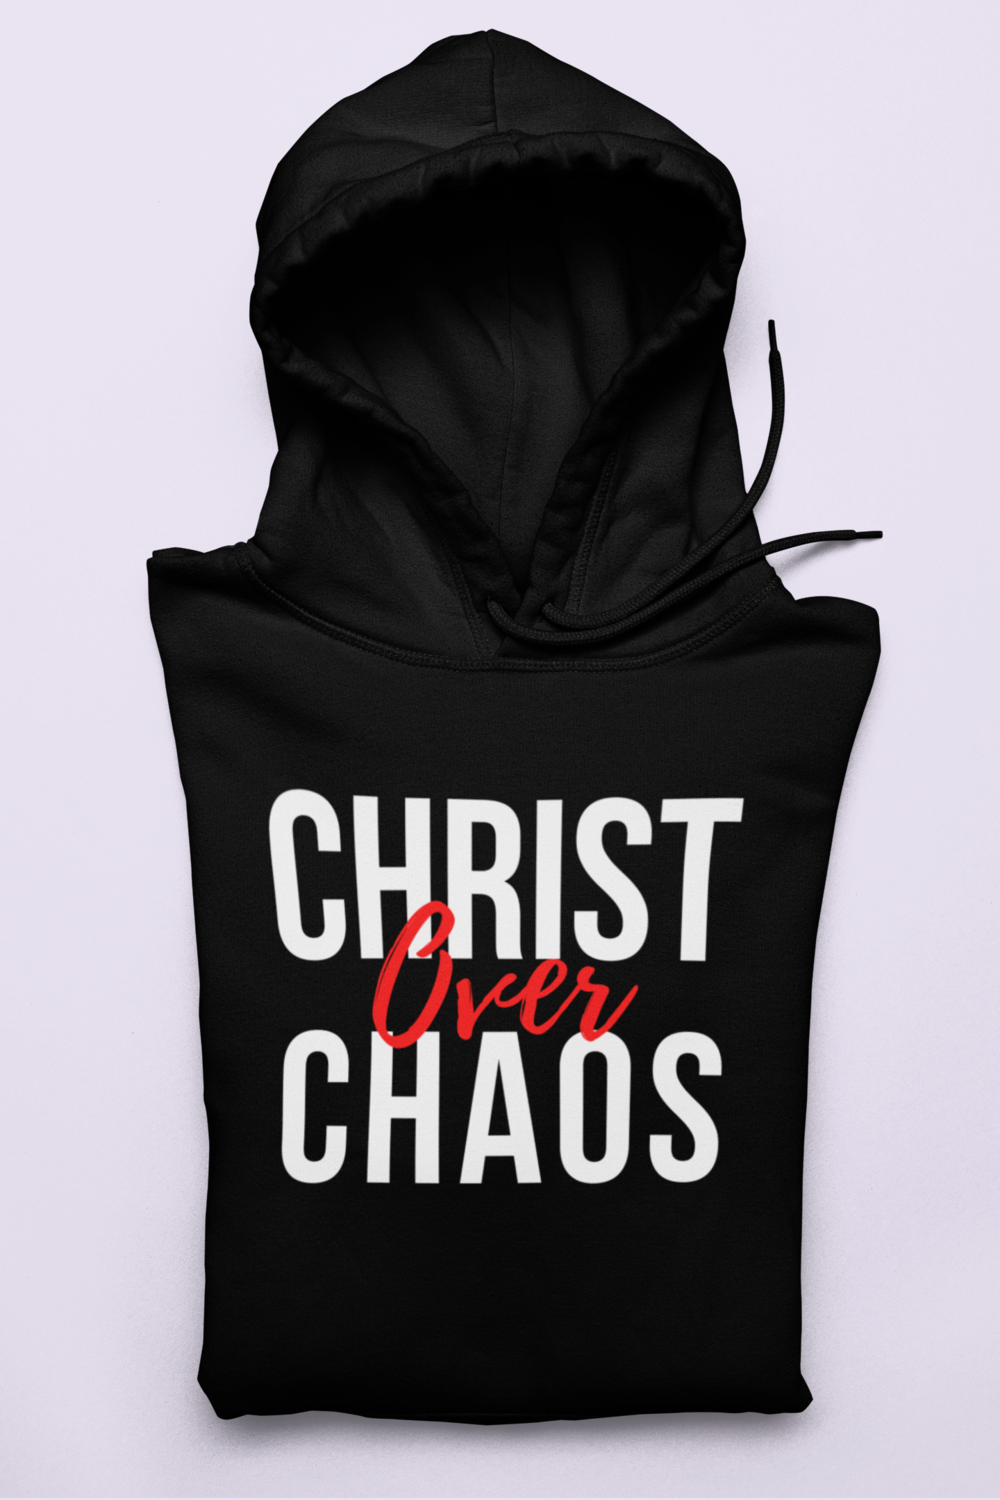 Christ over Chaos - Unisex Hoodie Black